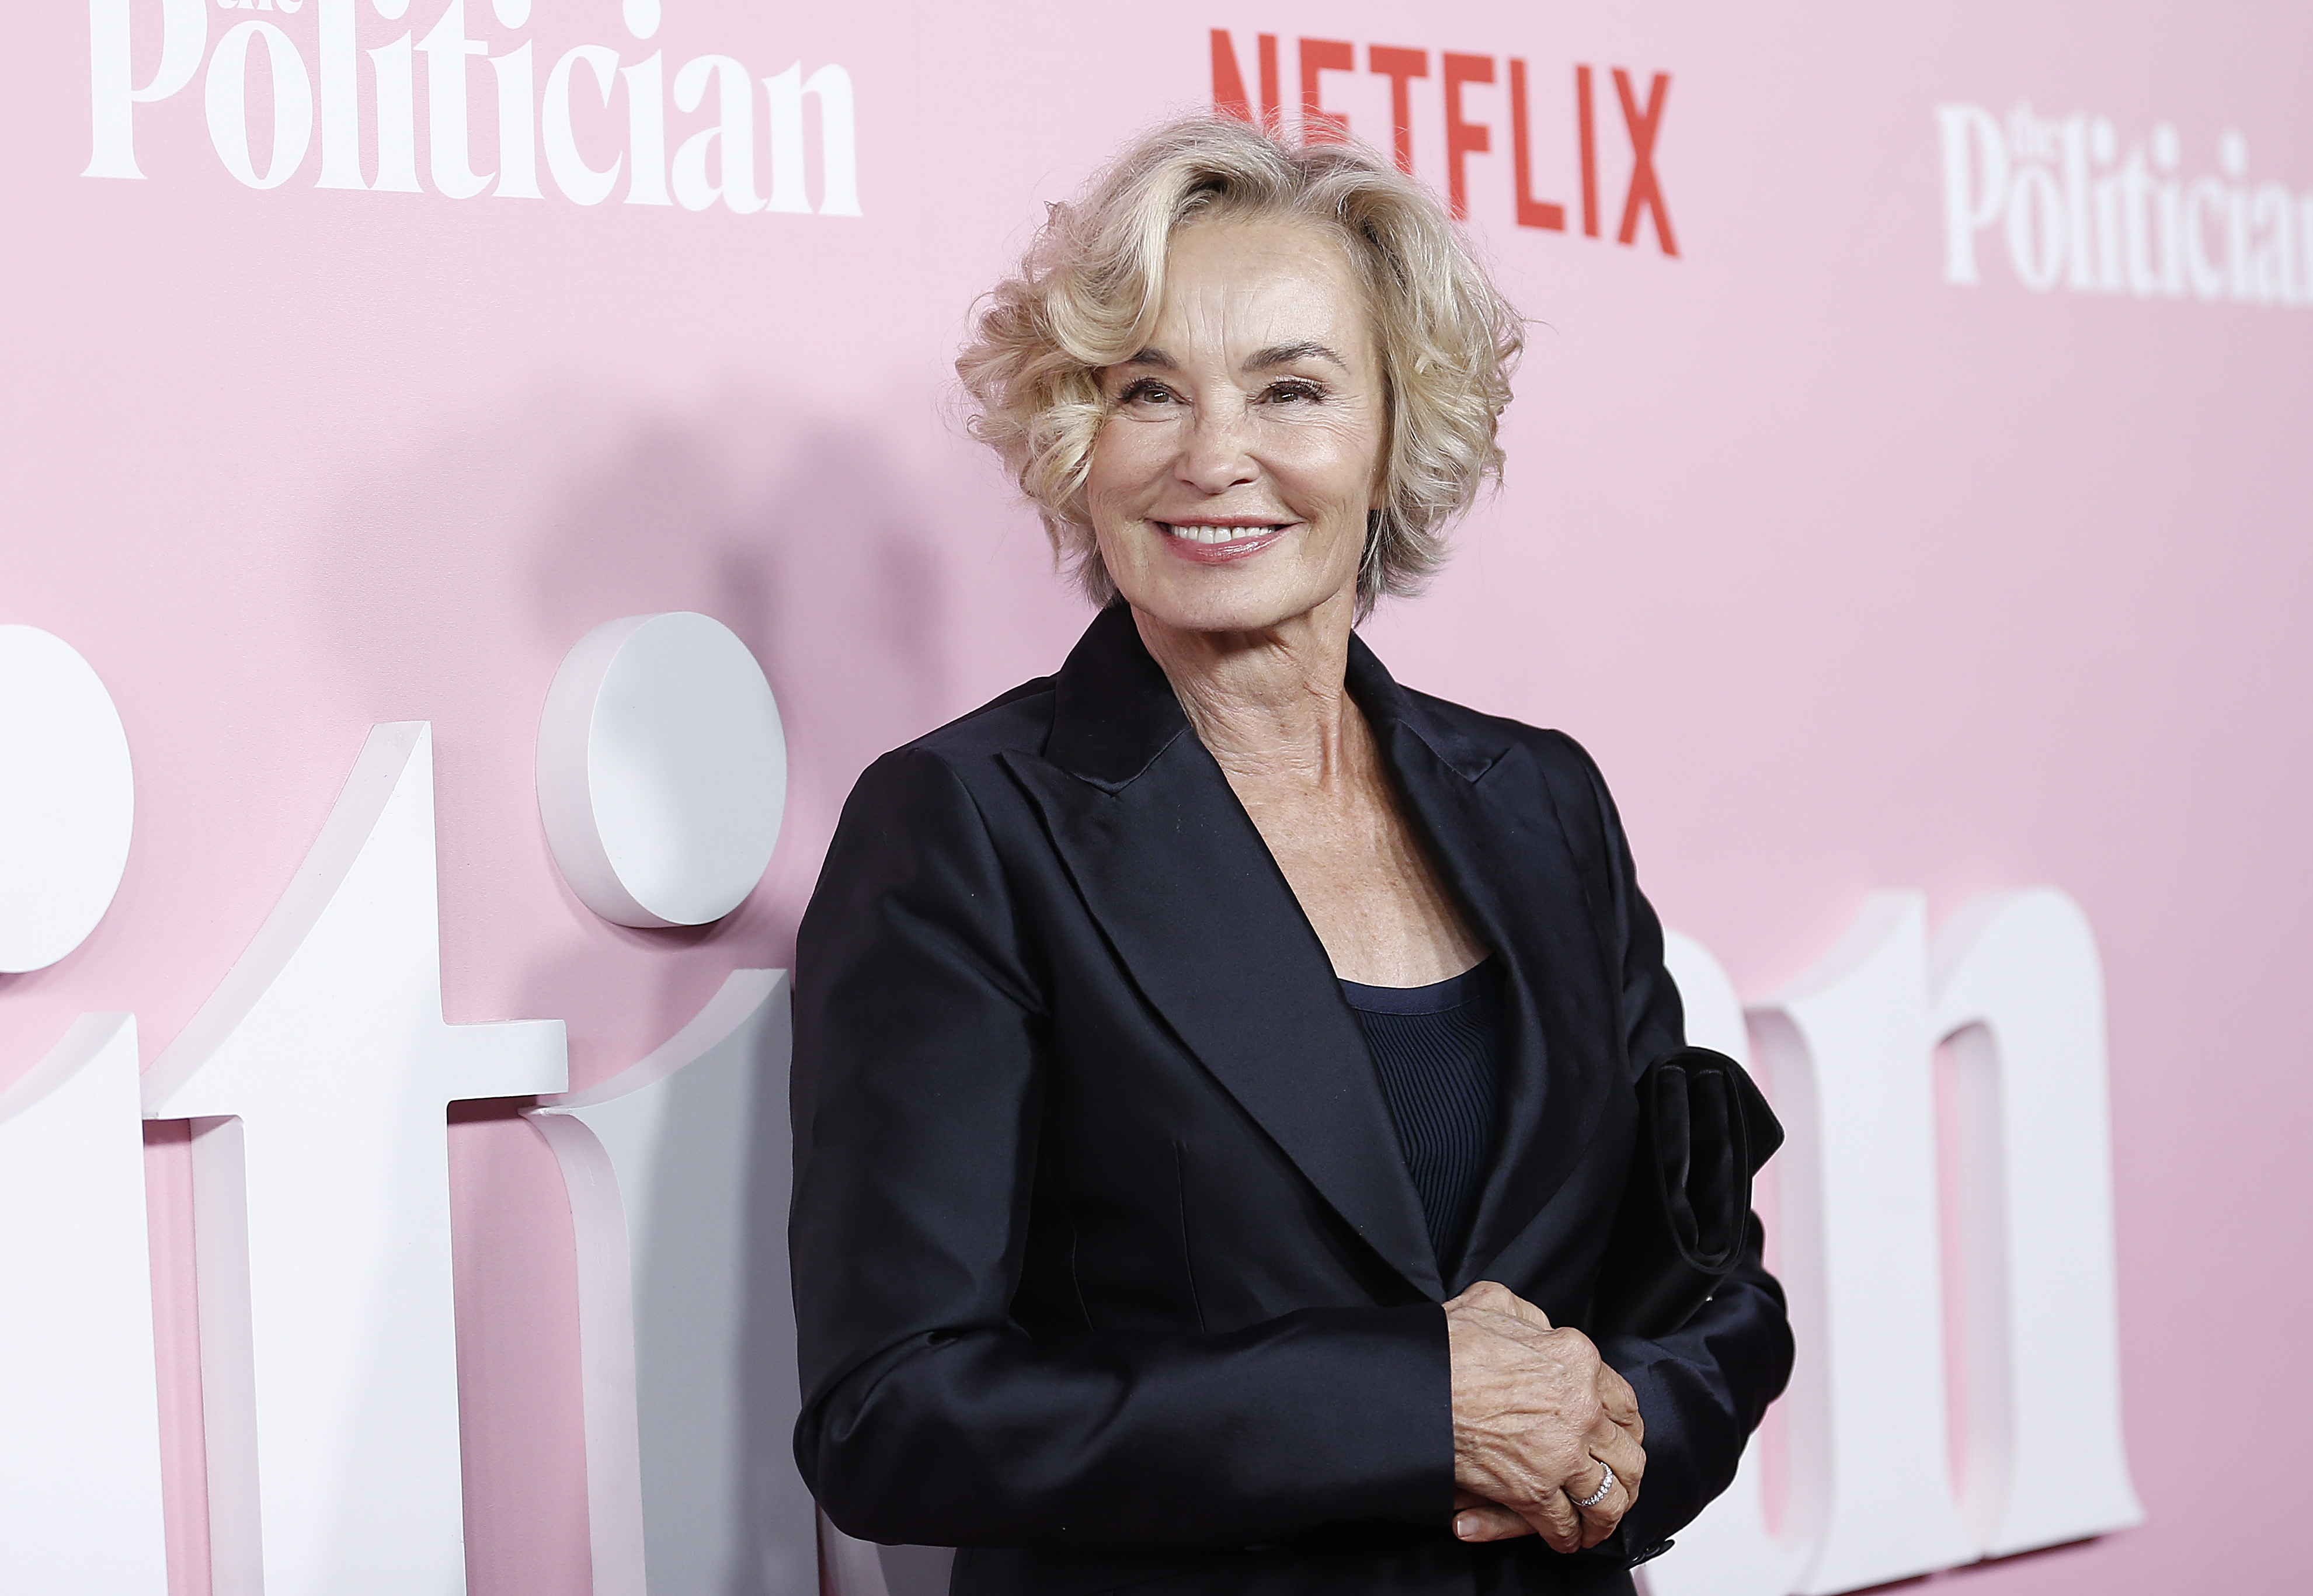  Jessica Lange attends "The Politician" New York Premiere at DGA Theater on September 26, 2019 in New York City. | Source: Getty Images